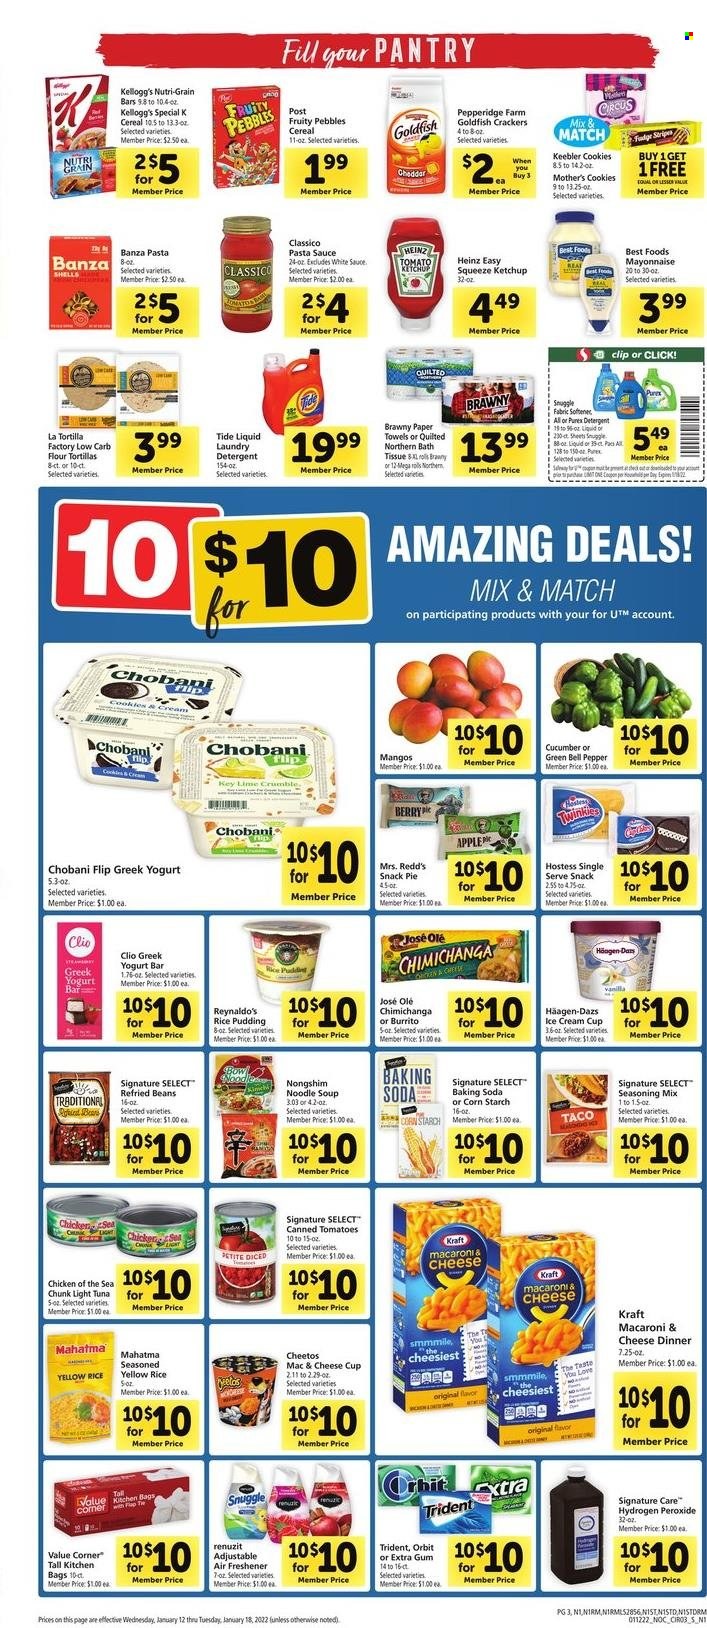 thumbnail - Safeway Flyer - 01/12/2022 - 01/18/2022 - Sales products - tortillas, pie, flour tortillas, beans, bell peppers, tomatoes, mango, tuna, pasta sauce, soup, noodles cup, burrito, noodles, Kraft®, cheese cup, greek yoghurt, Chobani, rice pudding, mayonnaise, Häagen-Dazs, cookies, fudge, snack, Orbit, crackers, Kellogg's, Trident, Keebler, Cheetos, Goldfish, bicarbonate of soda, refried beans, Heinz, light tuna, Chicken of the Sea, cereals, Fruity Pebbles, Nutri-Grain, pepper, spice, ketchup, Classico, Quilted Northern, tissues, kitchen towels, paper towels, detergent, Snuggle, Tide, laundry detergent, bag, cup, Renuzit, air freshener. Page 3.